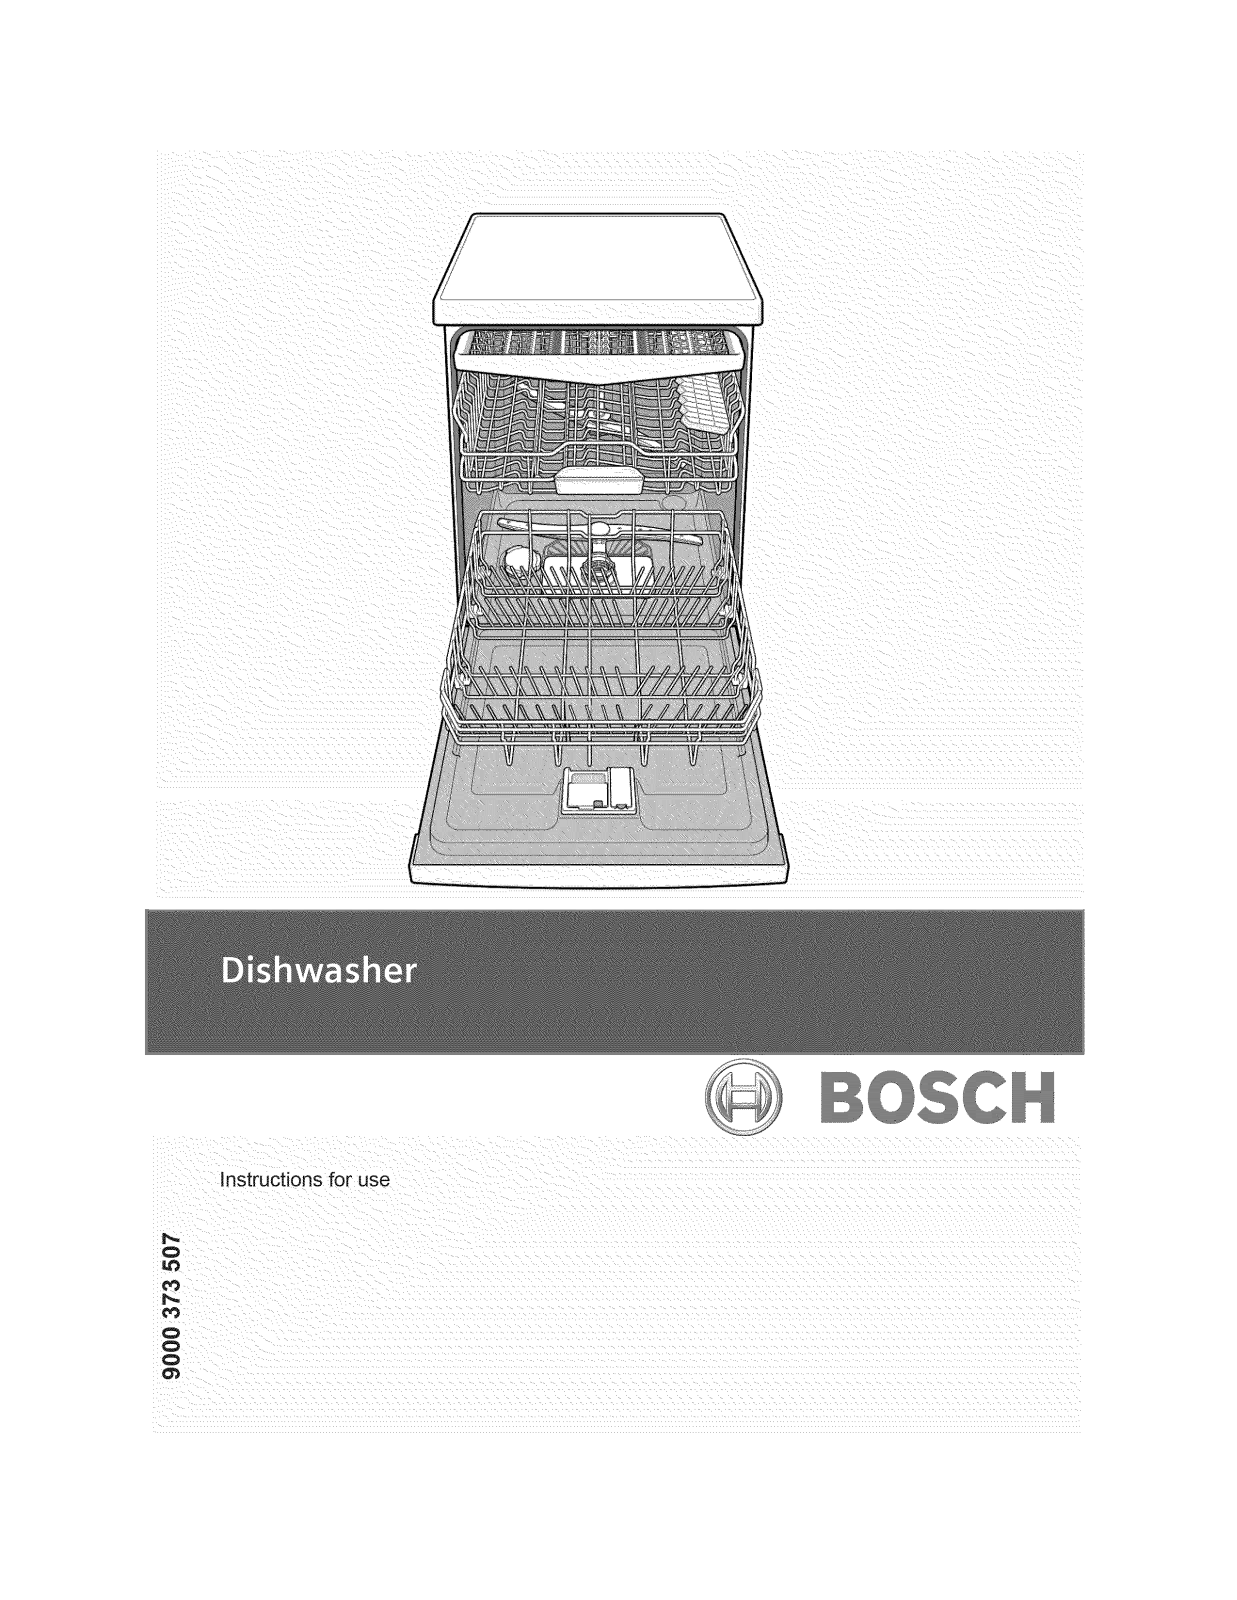 Bosch SGE63E05UC/28, SGE63E05UC/29, SHV68E13UC/16, SHV68E13UC/18, SHV68E13UC/23 Owner’s Manual